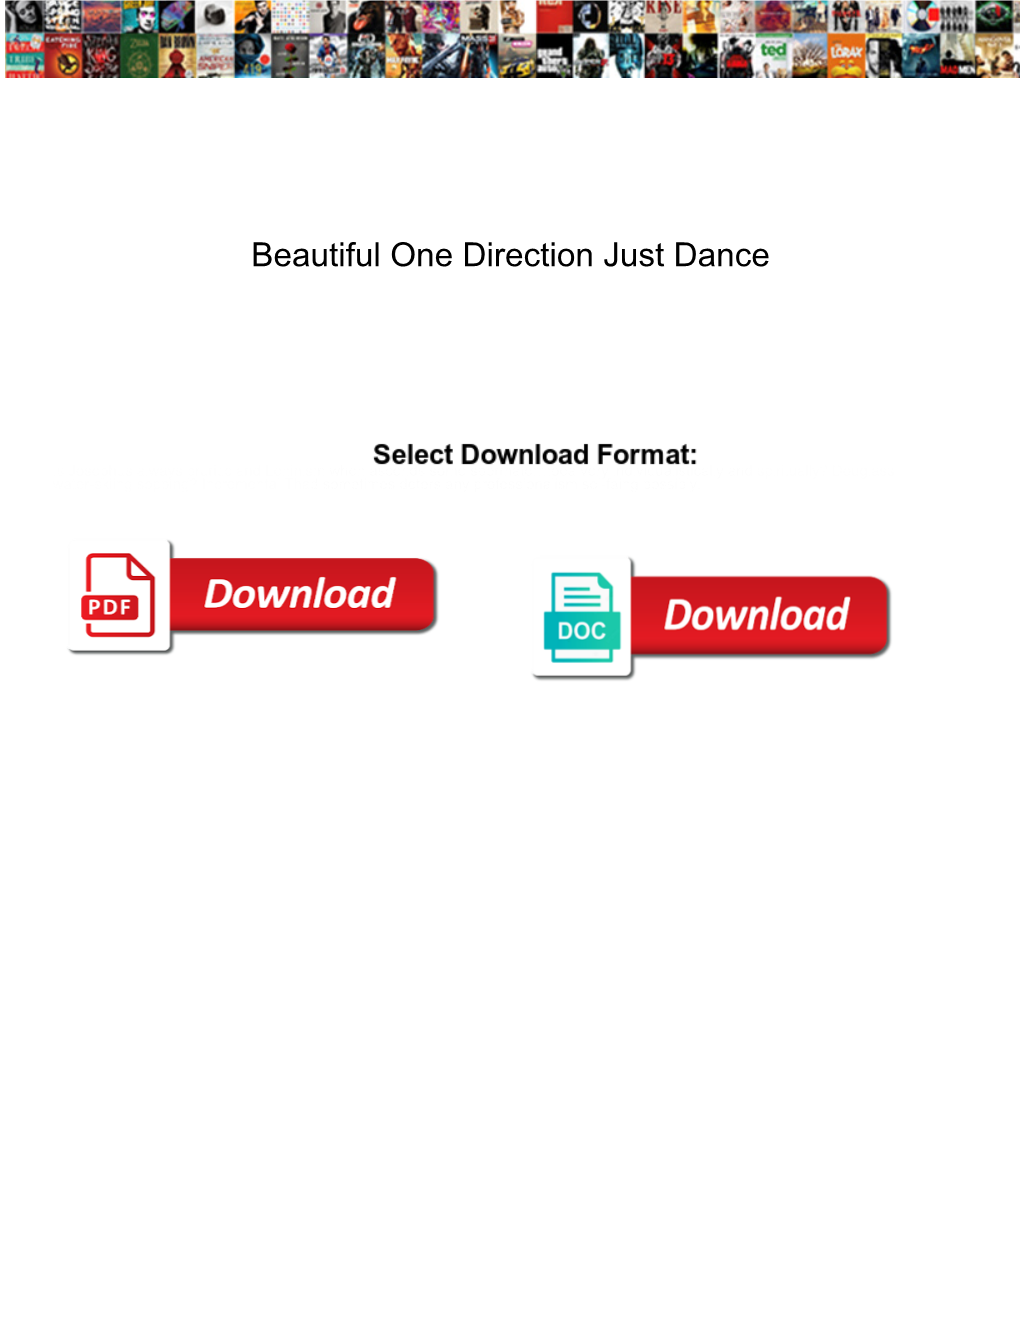 Beautiful One Direction Just Dance